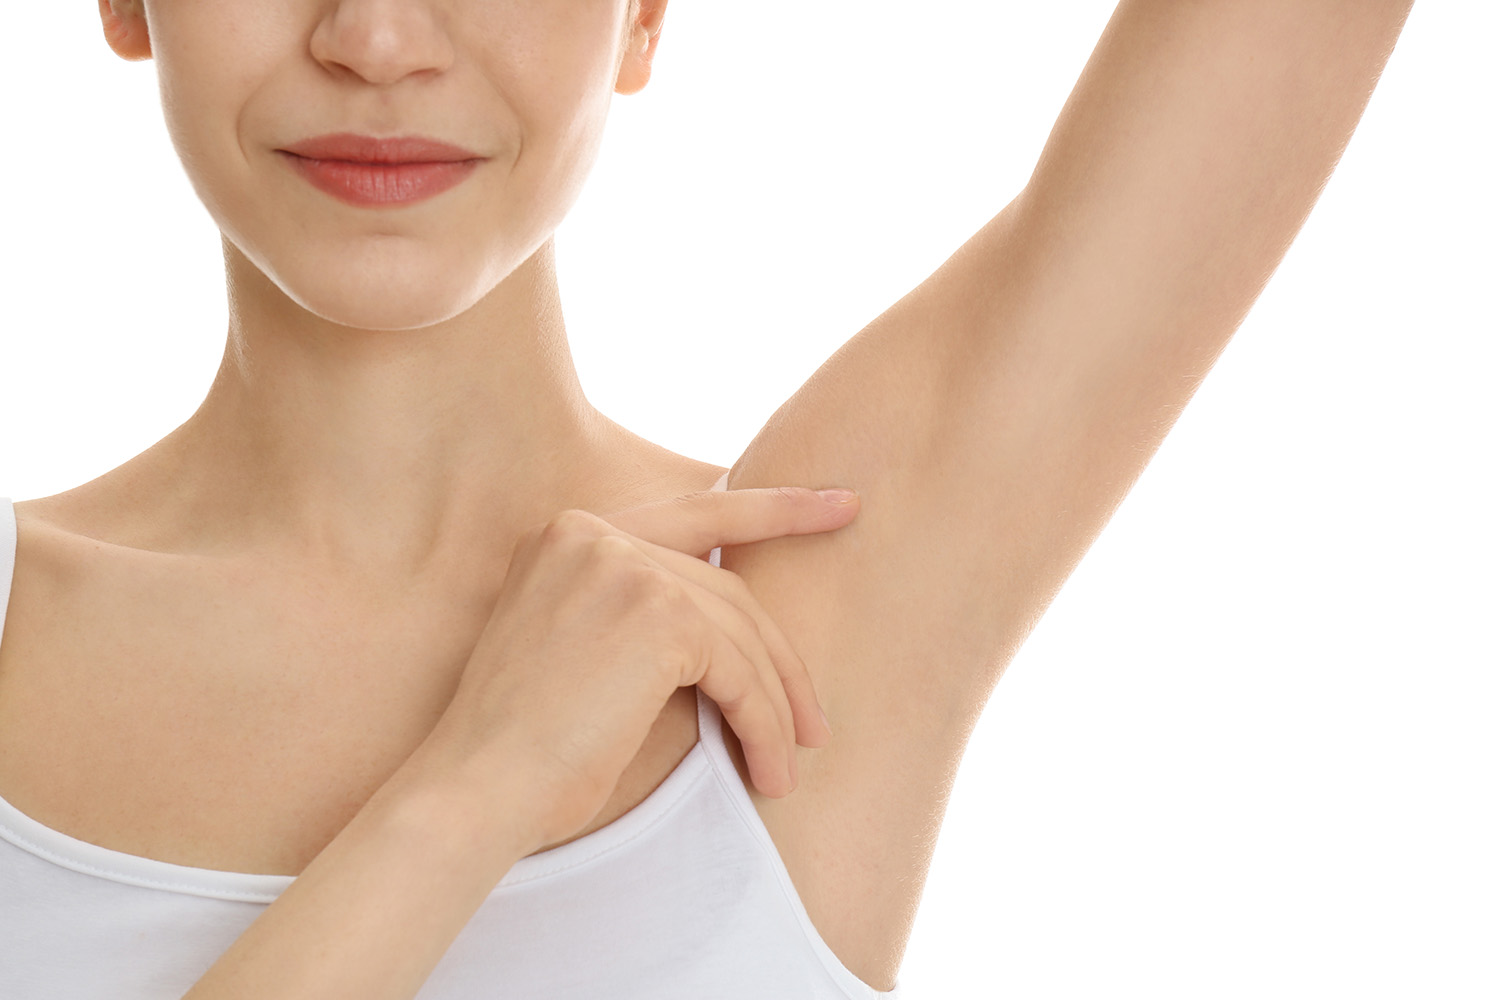 Laser Hair Removal - Underarms